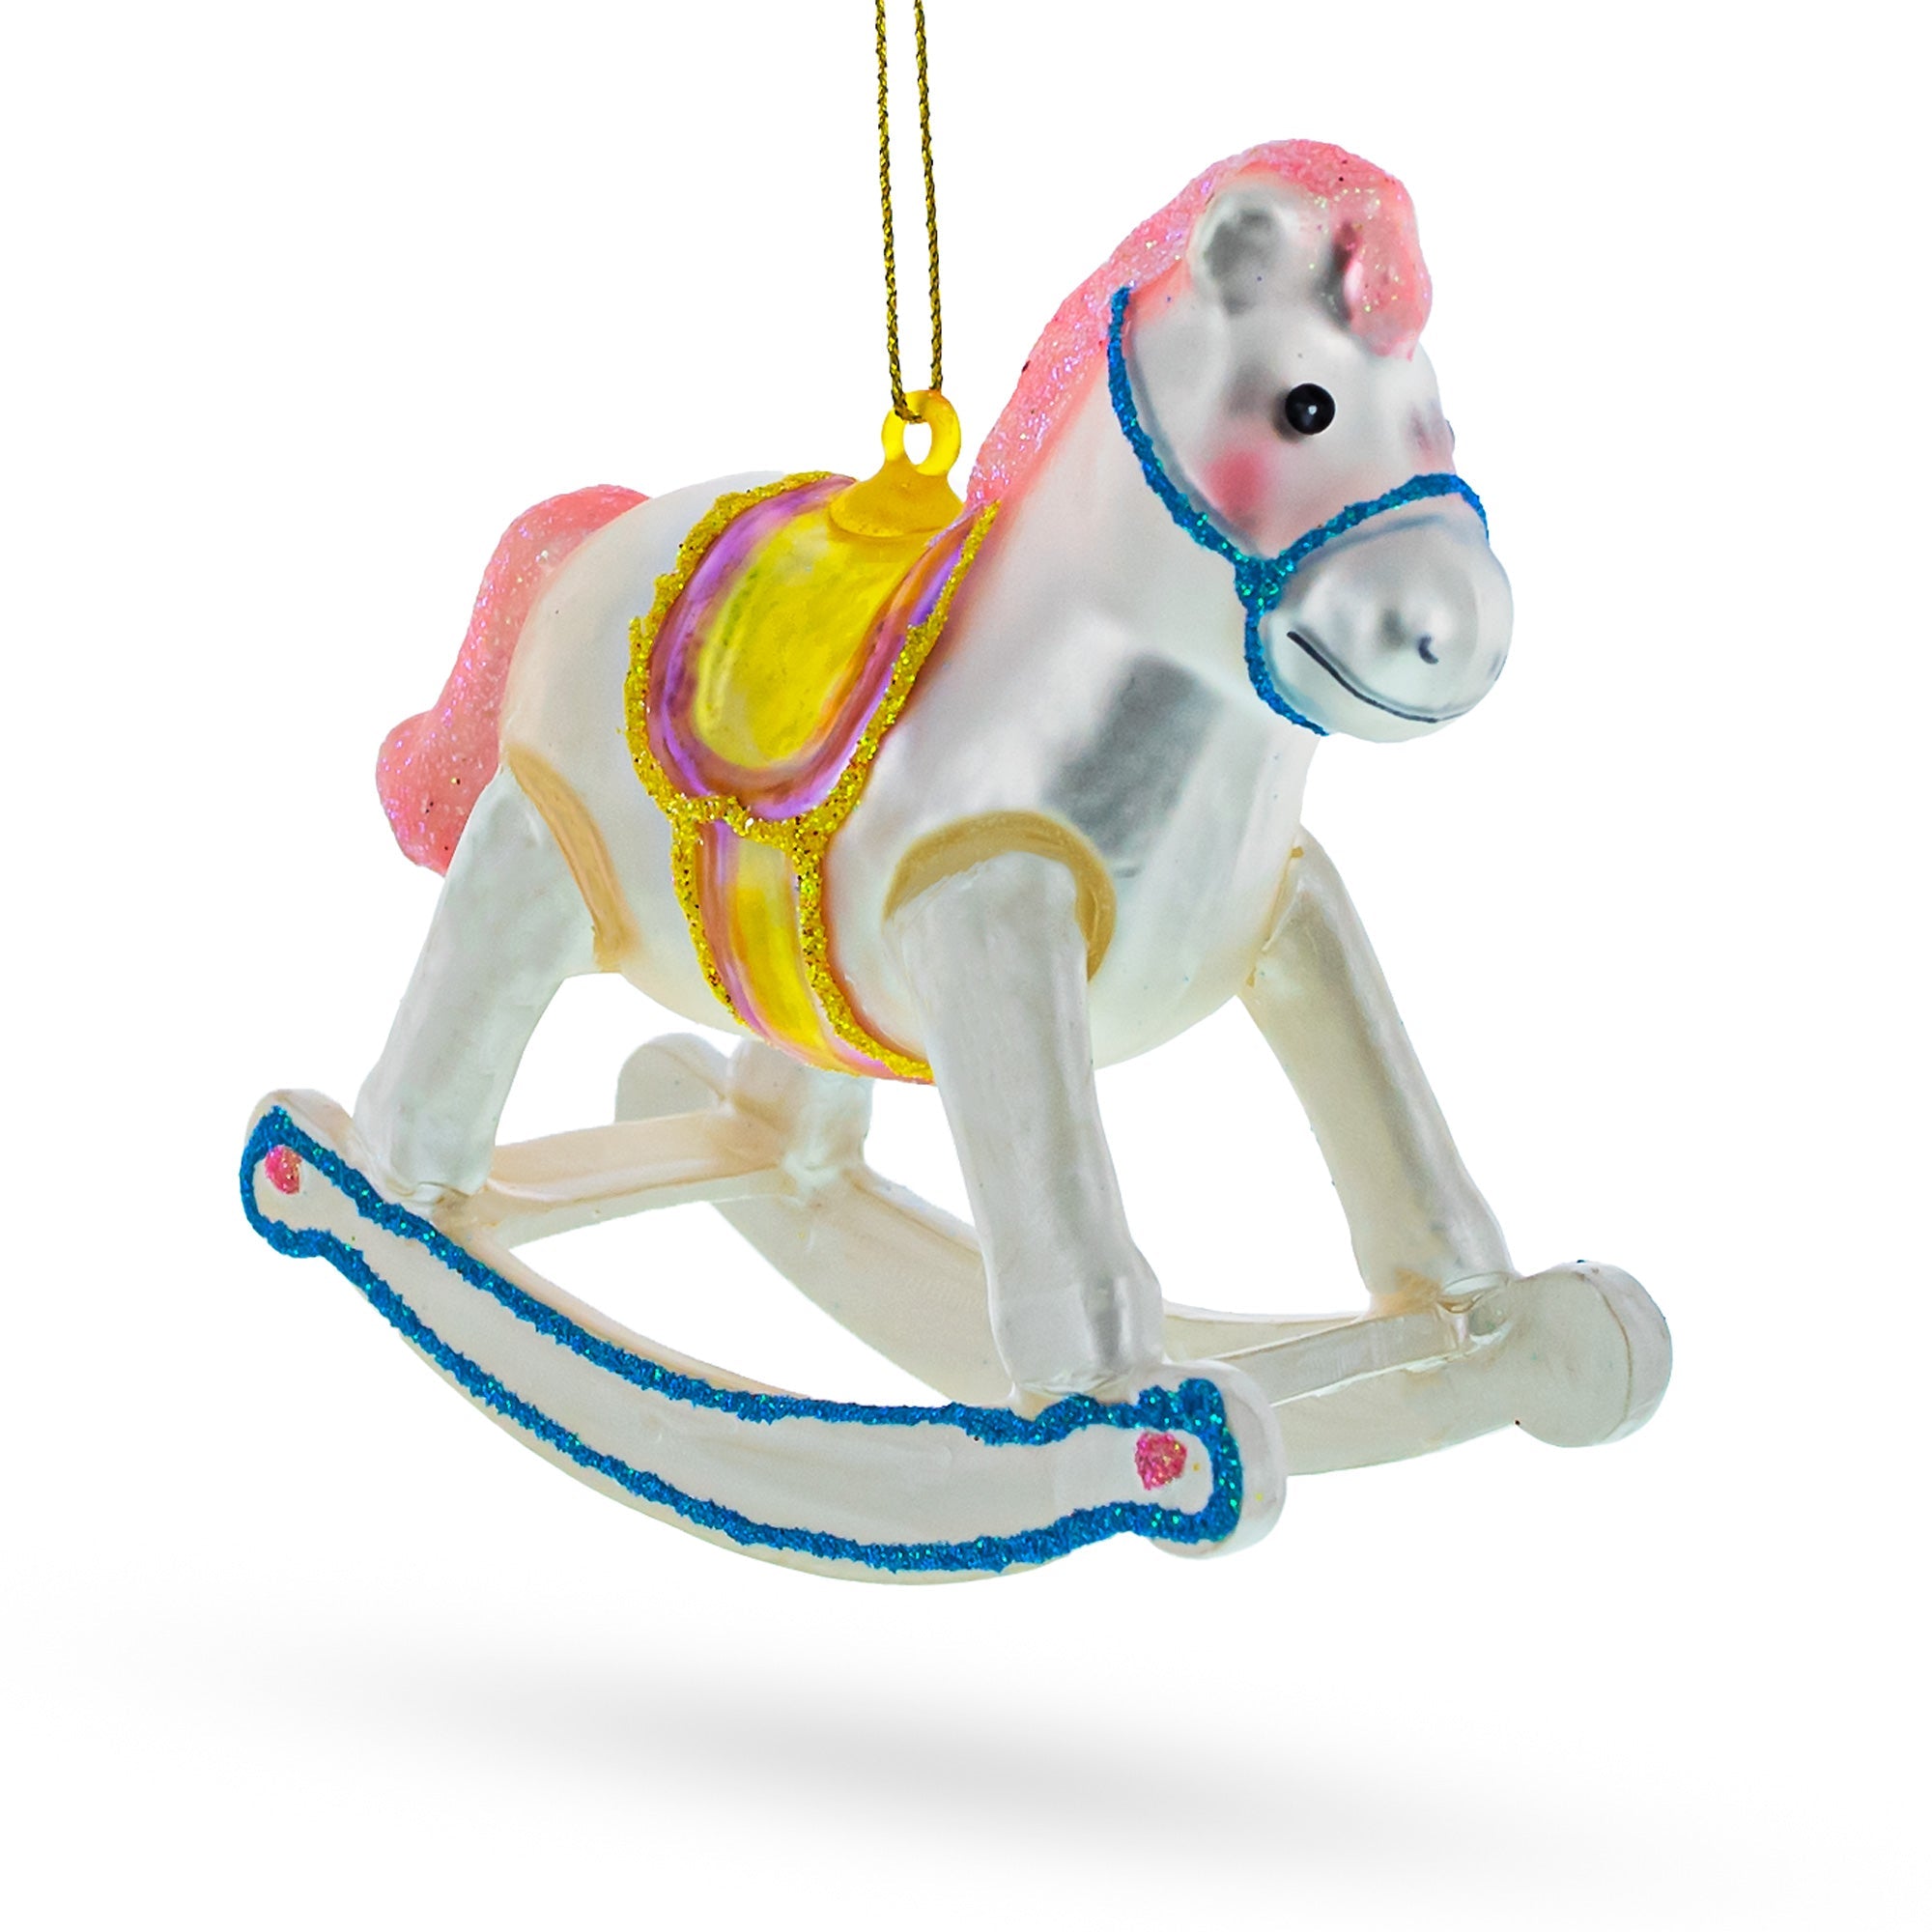 Baby Girl's Pink Rocking Horse - Lovable Blown Glass Christmas Ornament